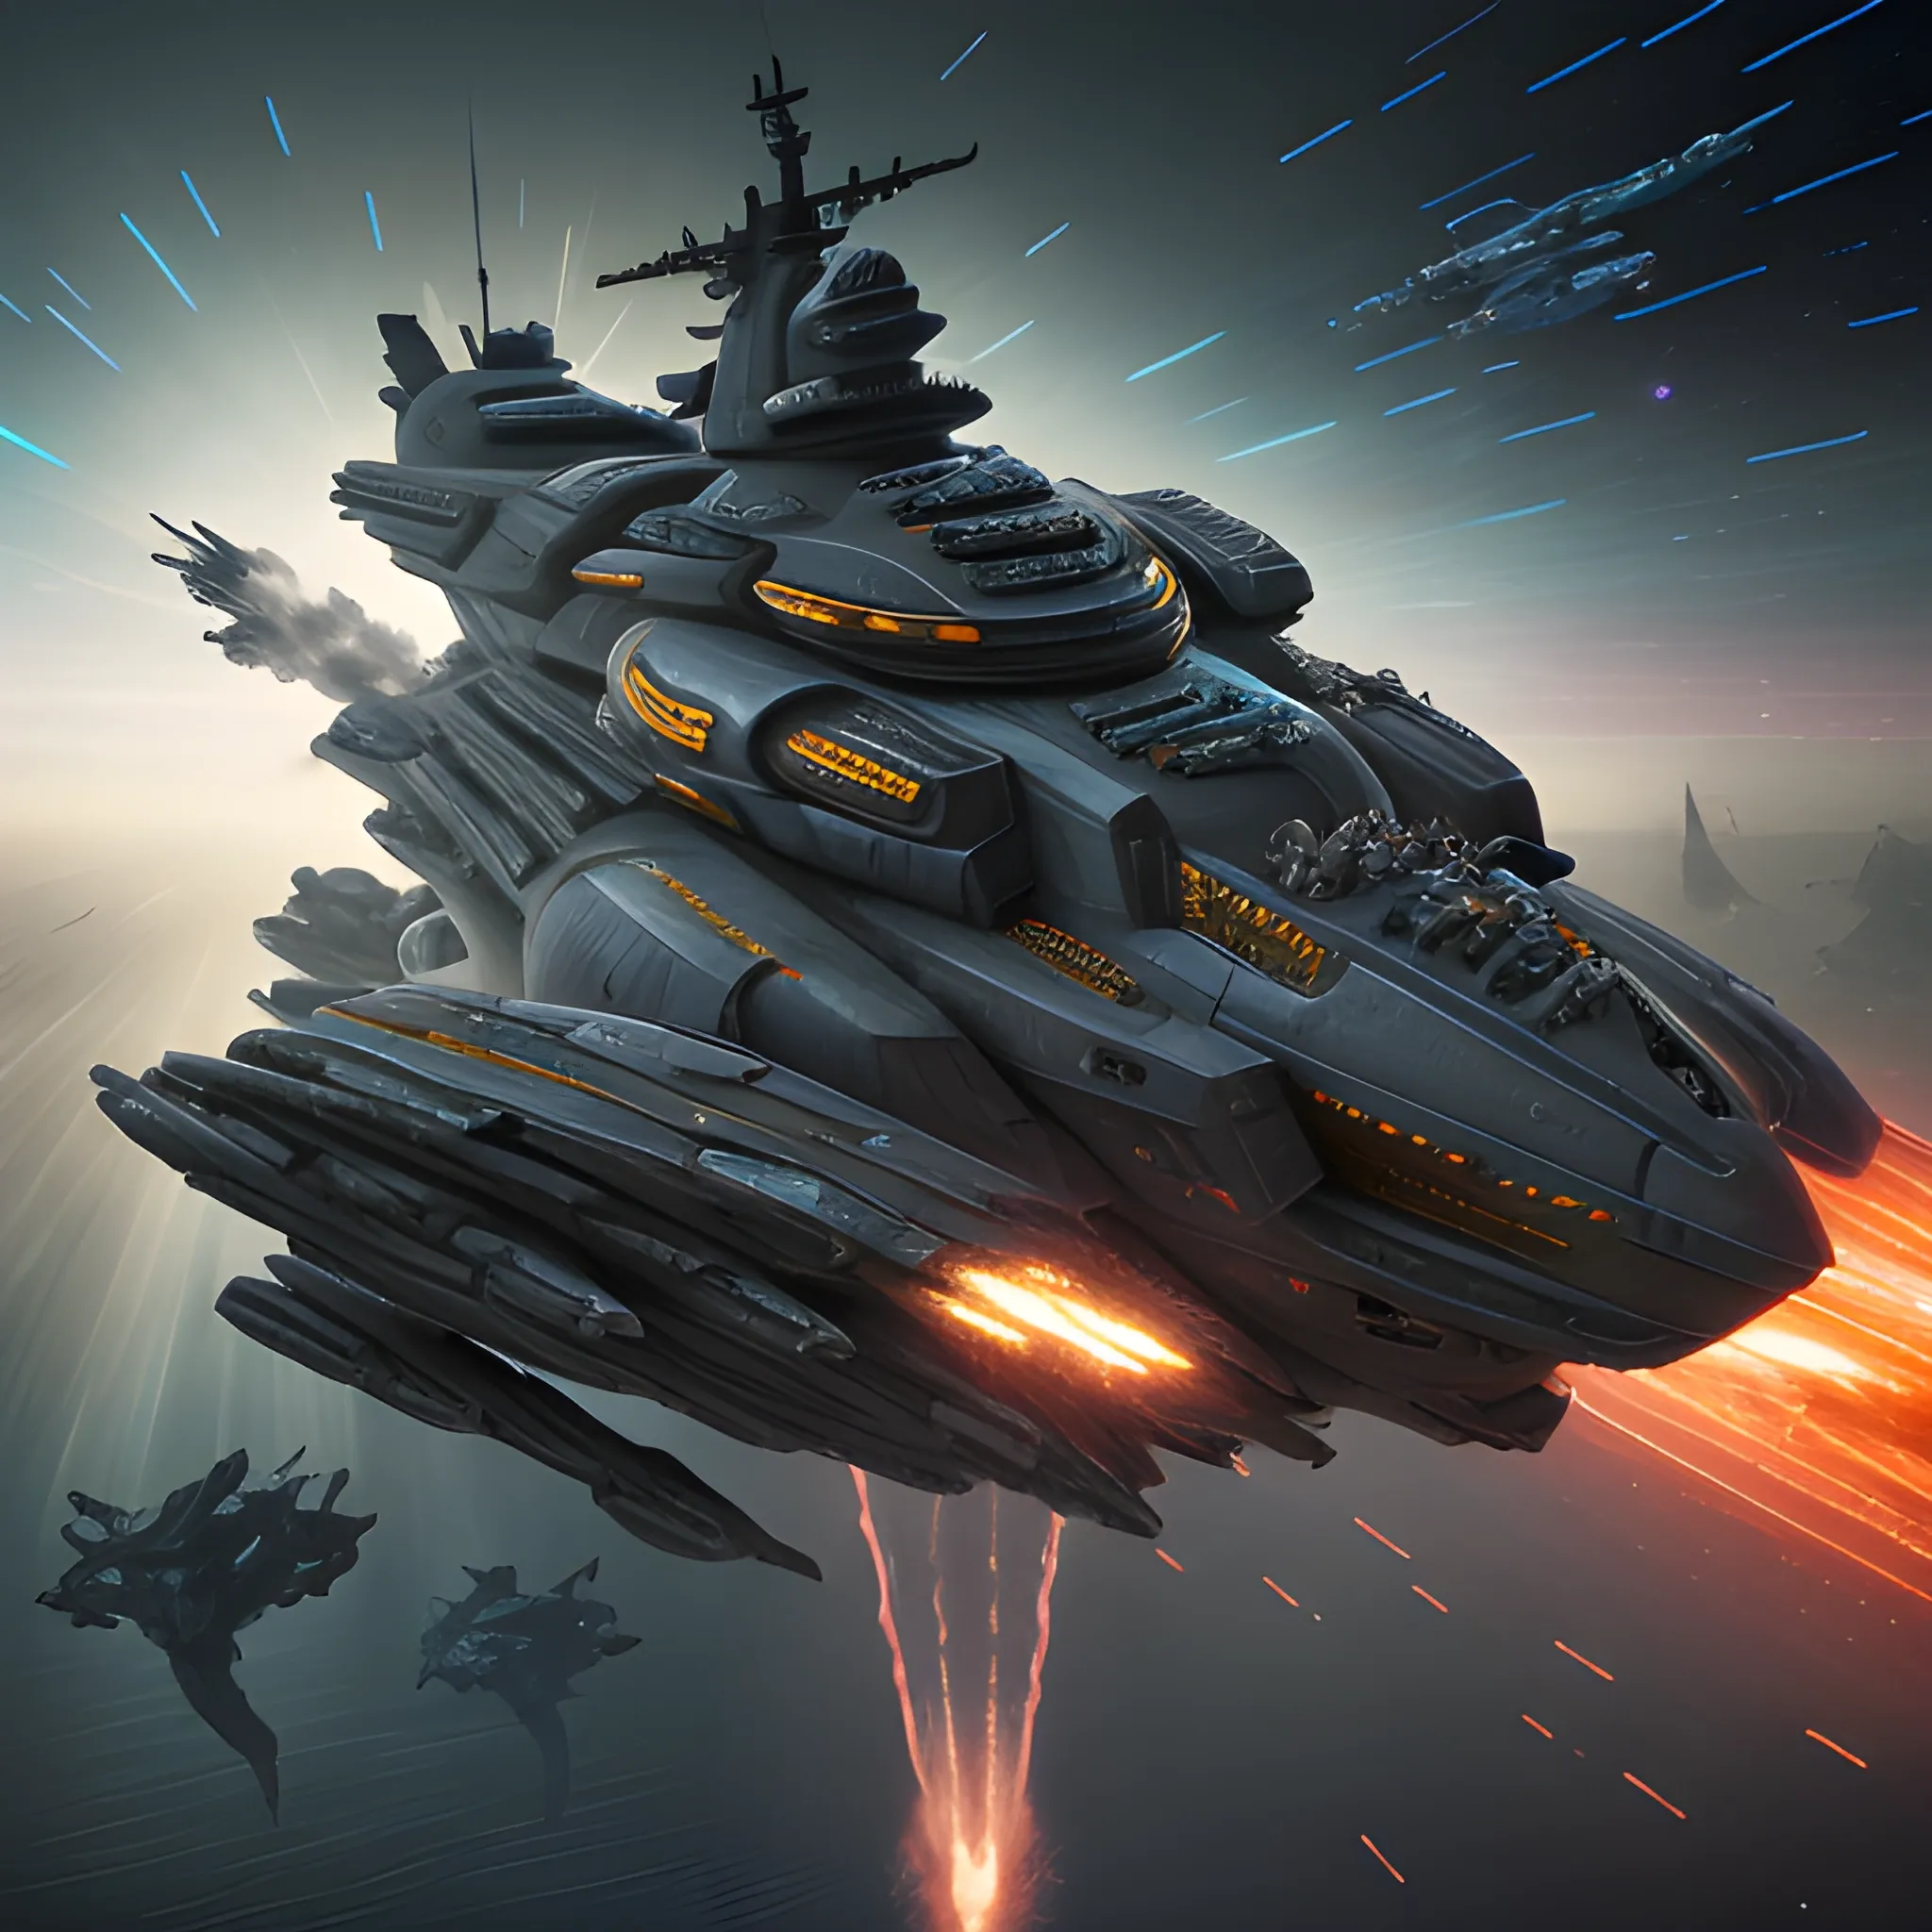 Title: "Terran Triumph: An Epic StarCraft Battle in 8K"



In this extremely detailed CG masterpiece， inspired by the iconic StarCraft universe， a Terran battlecruiser dominates the scene， surrounded by a fierce and electrifying combat. Set against the backdrop of a distant galaxy， the intricately designed base bustles with activity， as laser guns discharge fiery beams in a thrilling display of high-resolution warfare.



This stunning 8K wallpaper showcases hyperdetailed visuals， immersing viewers in the captivating world of StarCraft. The cyber screen frame adds a futuristic touch， while the absurdly high resolution ensures that even the most refined， delicate details are meticulously captured.



Cinematic lighting， accompanied by strong rim light， illuminates the scene， highlighting the battlecruiser's sleek design and intensifying the sense of action. Brighter colors punctuate the chaos， guiding the viewer's eye through the vast expanse of the conflict. The depth of field effect brings the central elements into sharp focus， while the unity of the composition anchors the viewer in the heart of the battle.



This exceptional 8K wallpaper pays homage to the beloved StarCraft franchise， combining cutting-edge technology and artistic skill to deliver an unforgettable visual experience filled with intricate details， refined delicacy， and unparalleled realism.